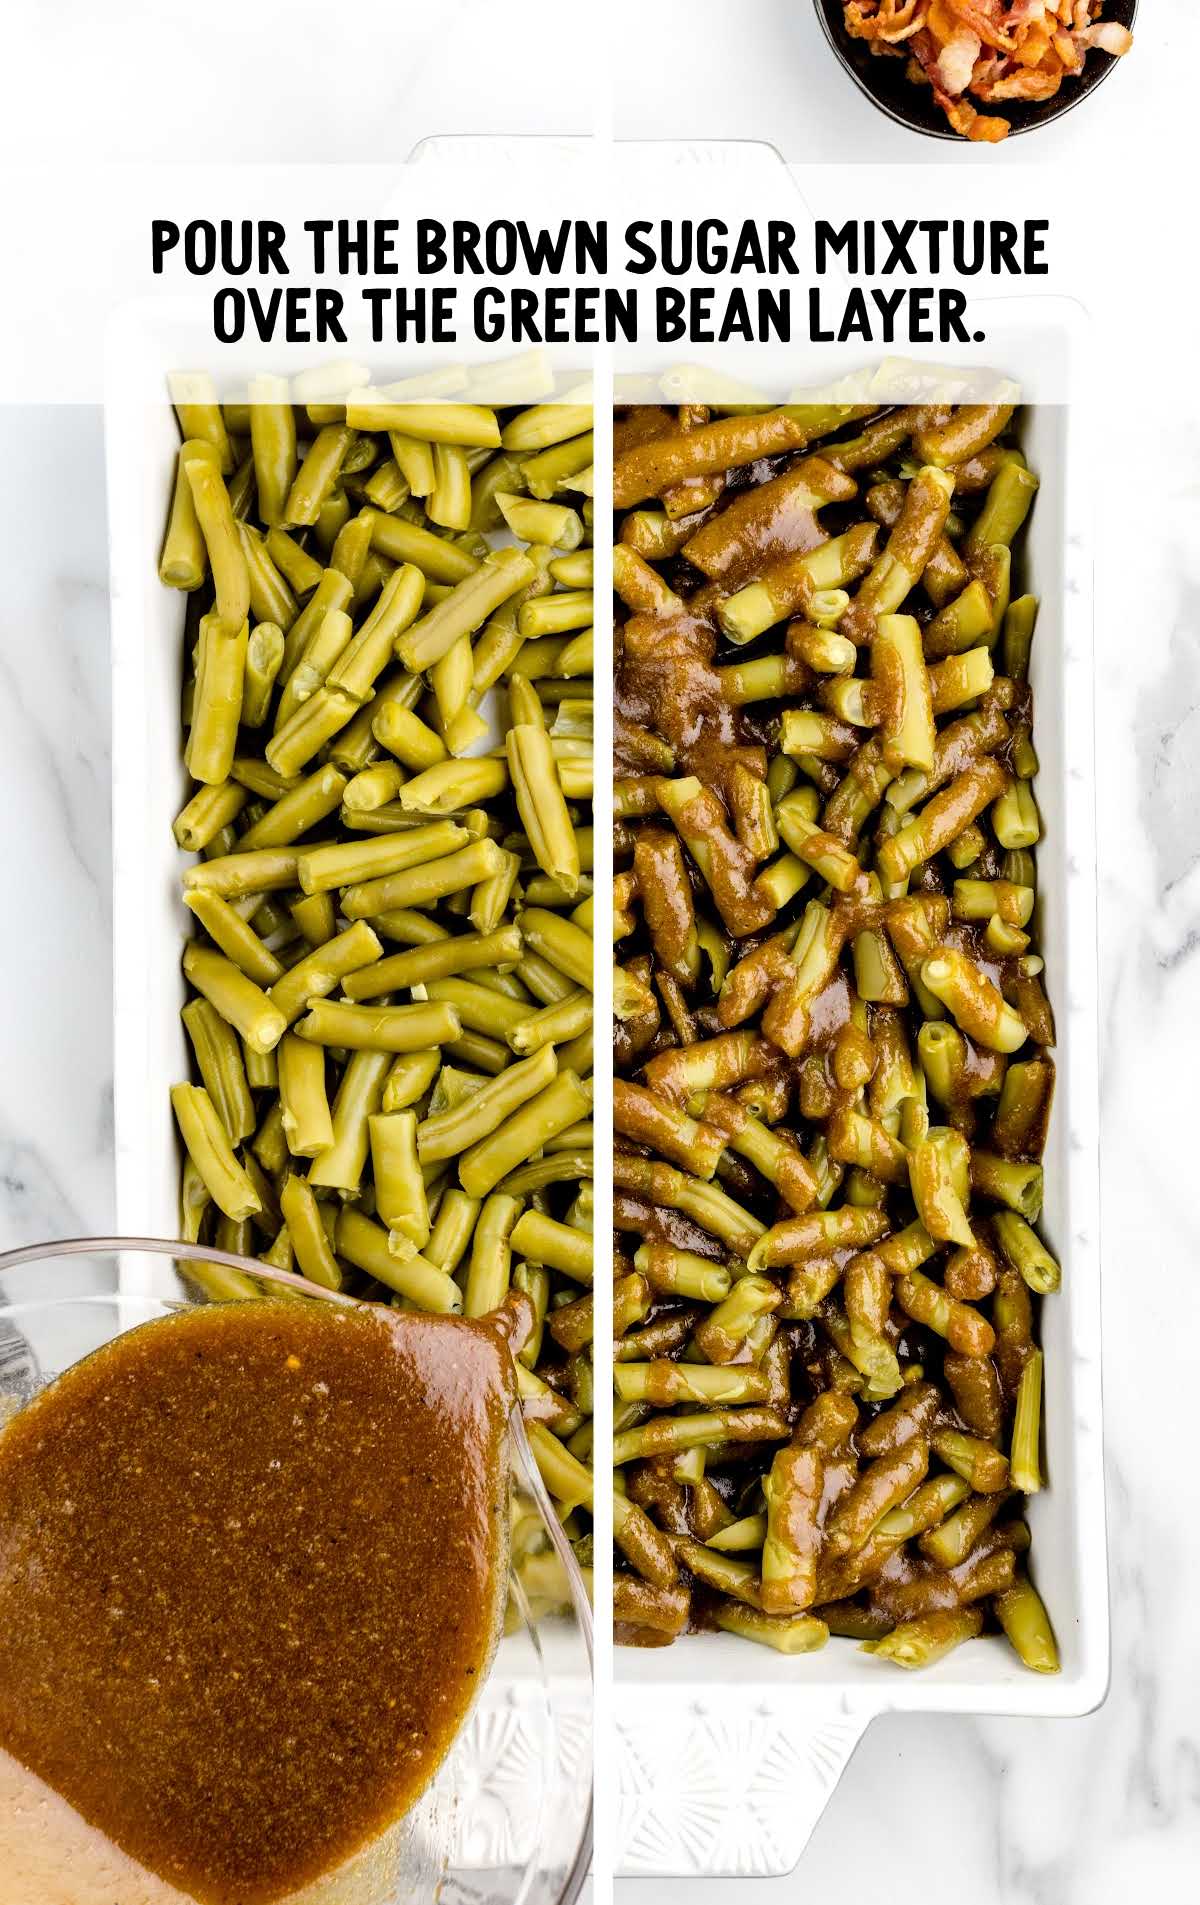 brown sugar mixture spread over the green bean layer in a baking dish